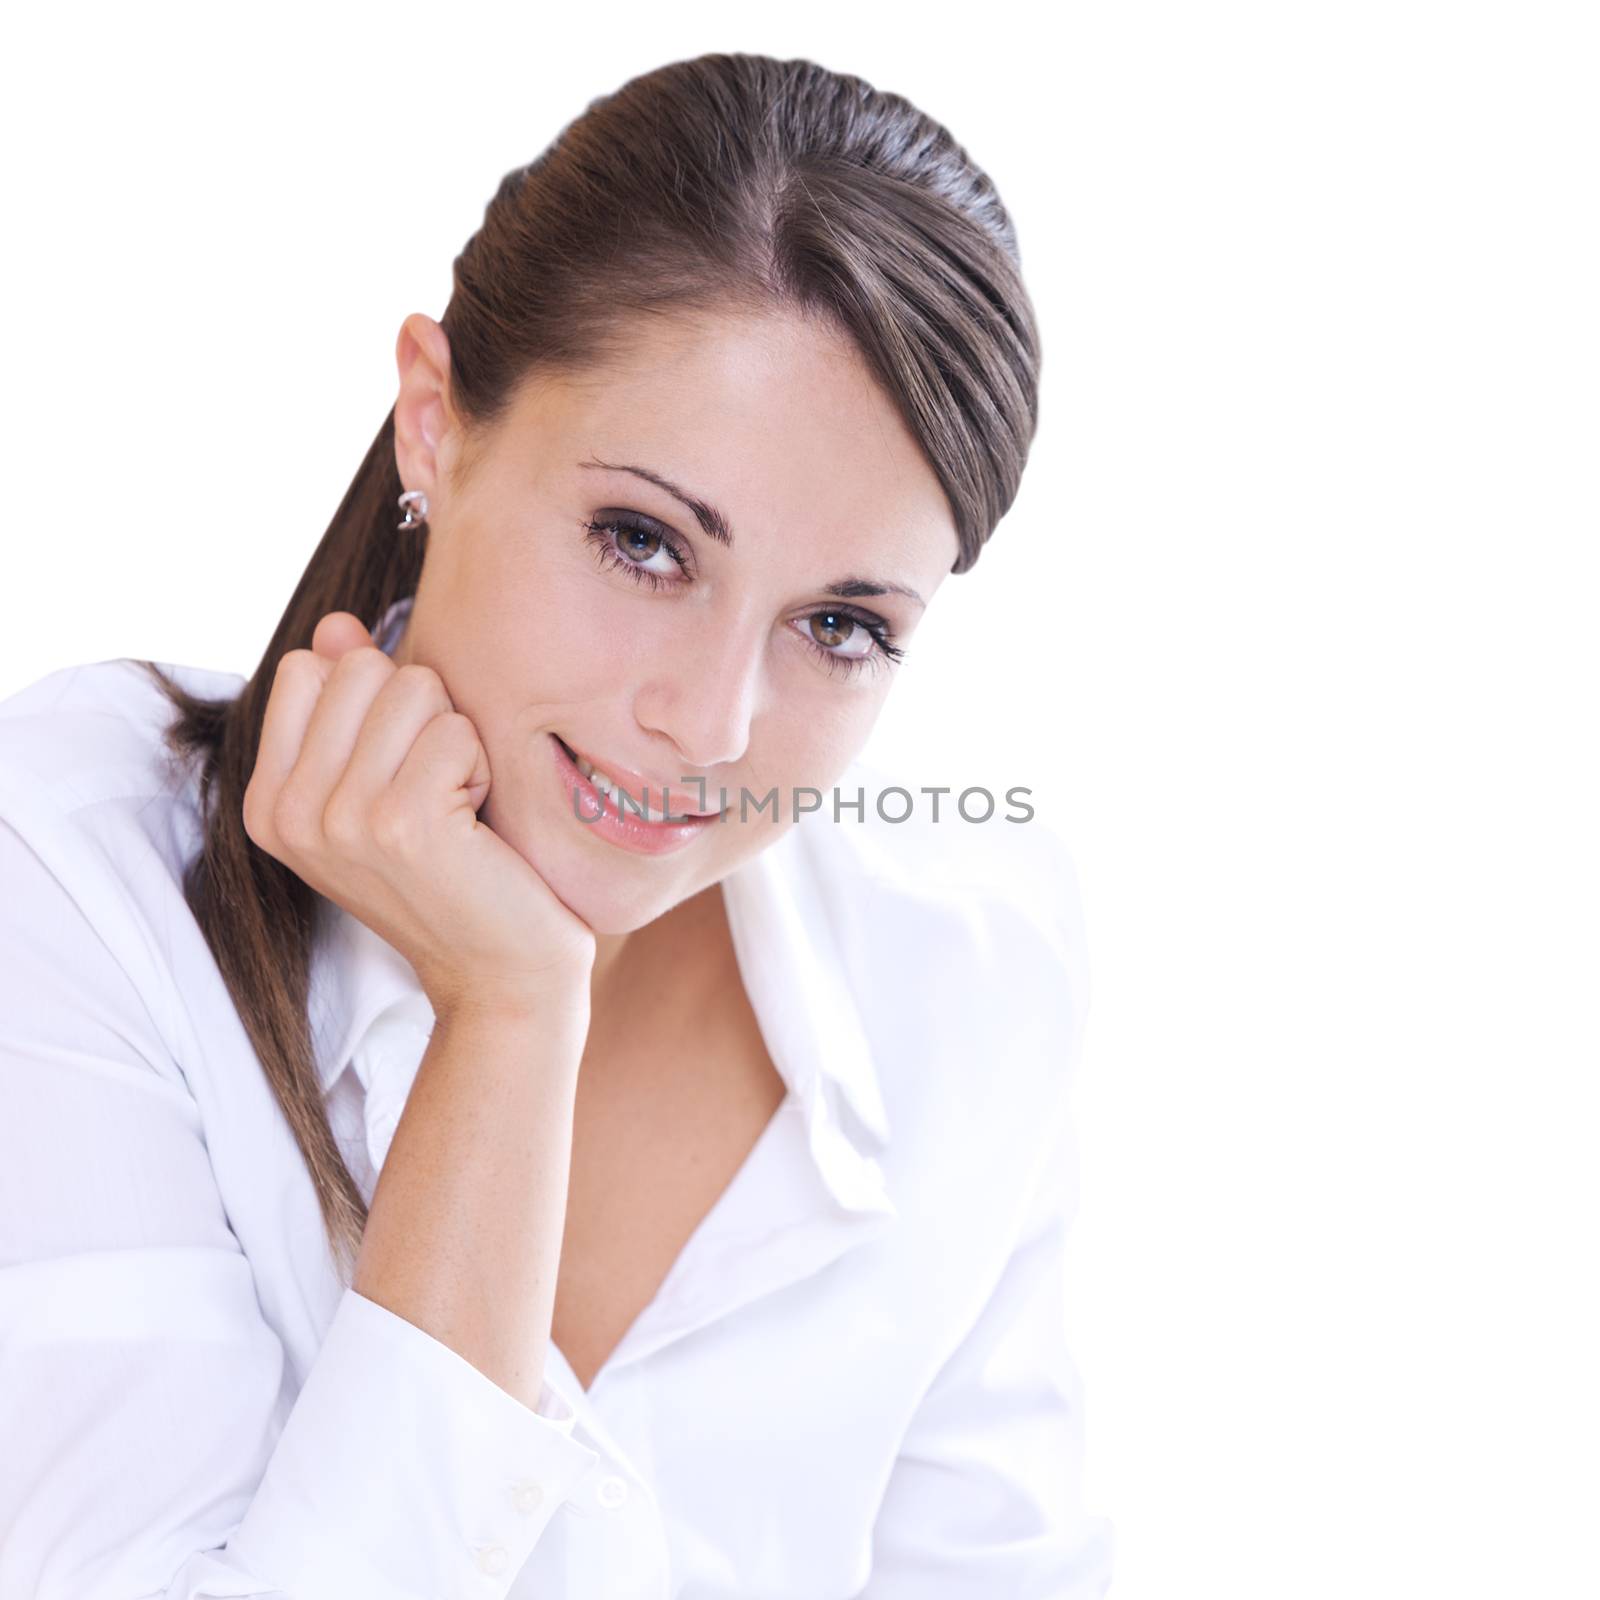 Attractive smiling woman by stokkete